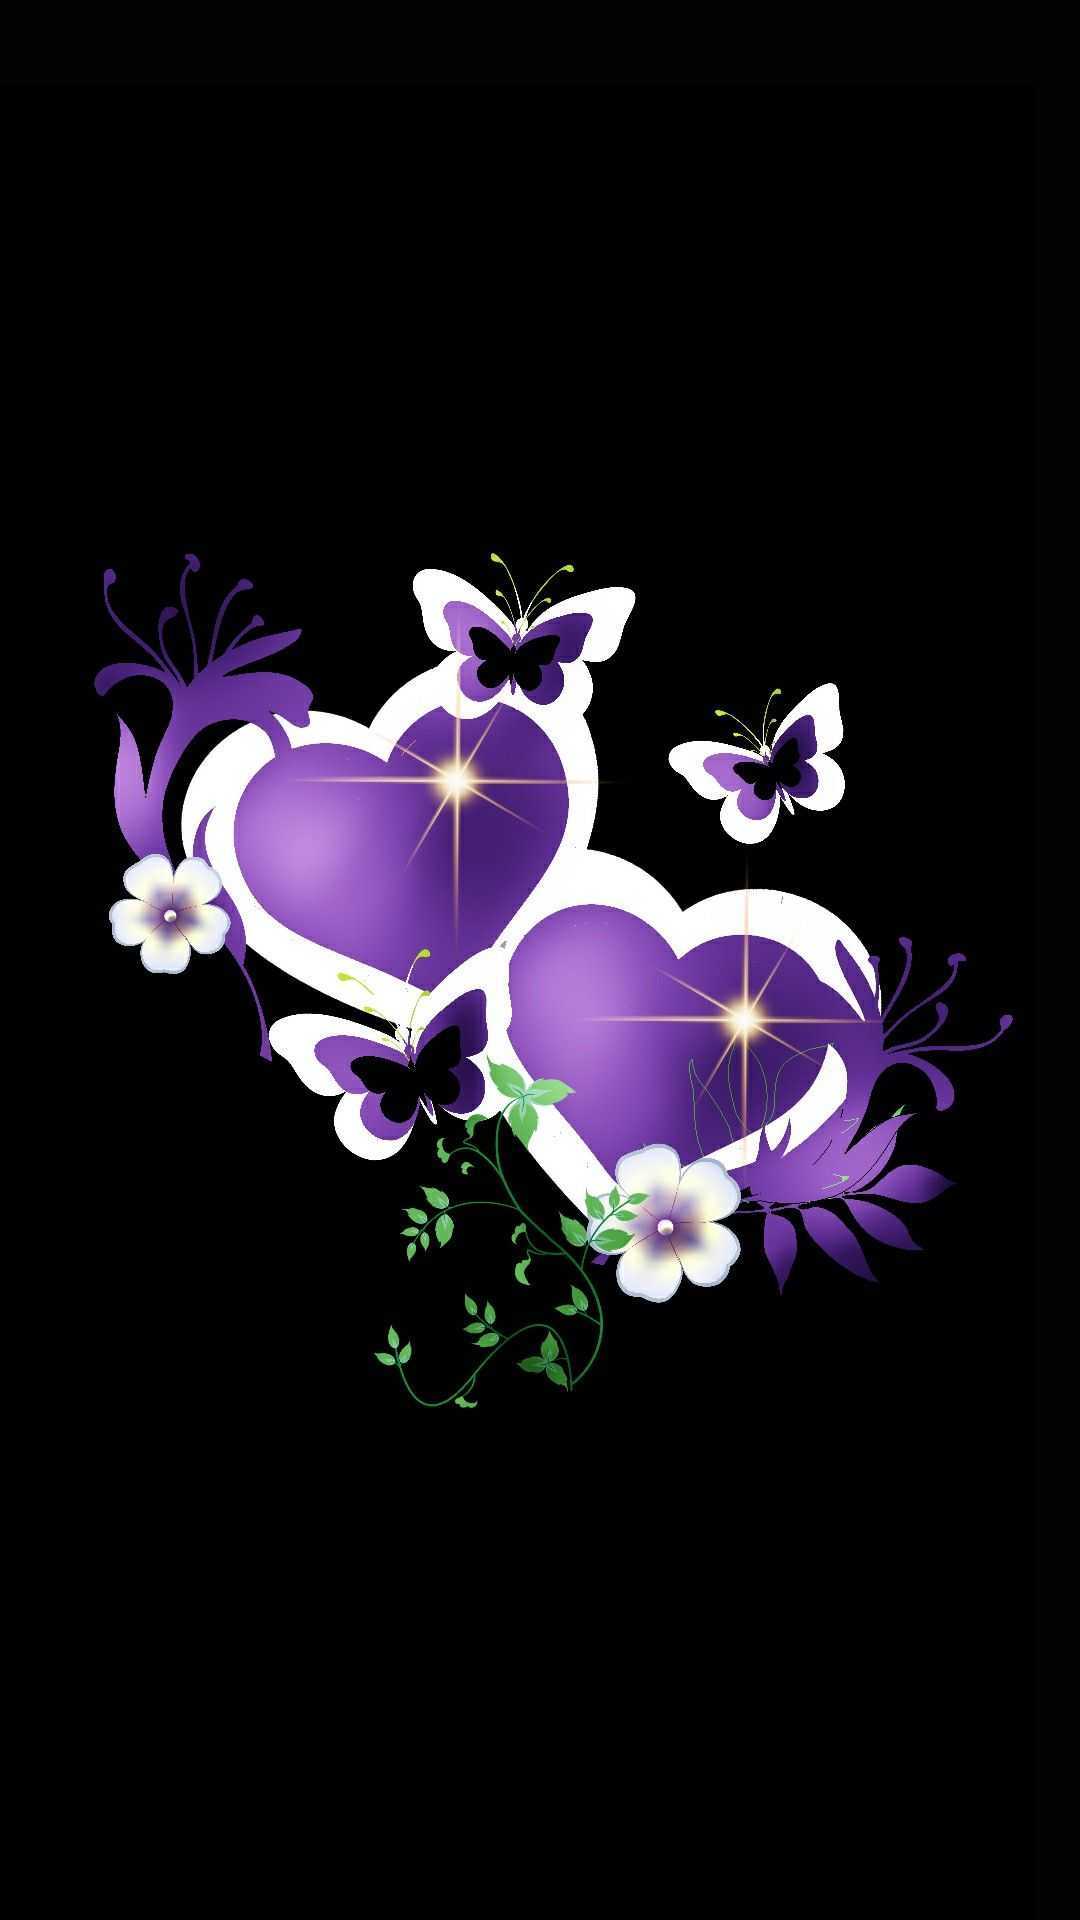 IPhone wallpaper purple hearts with butterflies and flowers on a black background - Heart, cute purple, black heart